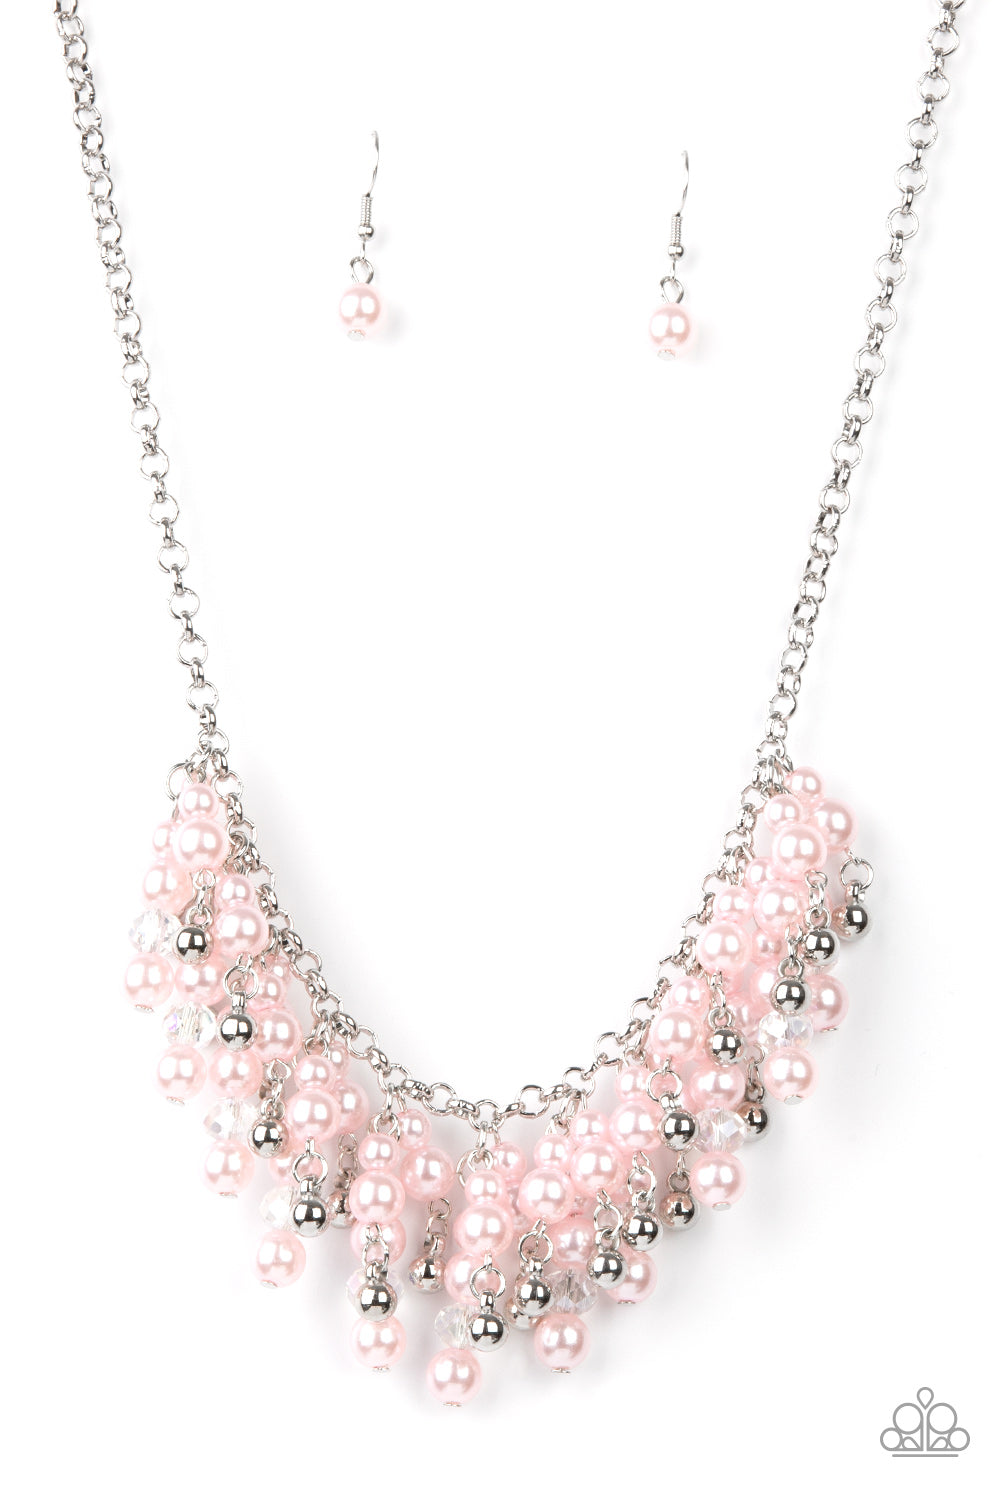 Paparazzi - Champagne Dreams - Pink Necklace